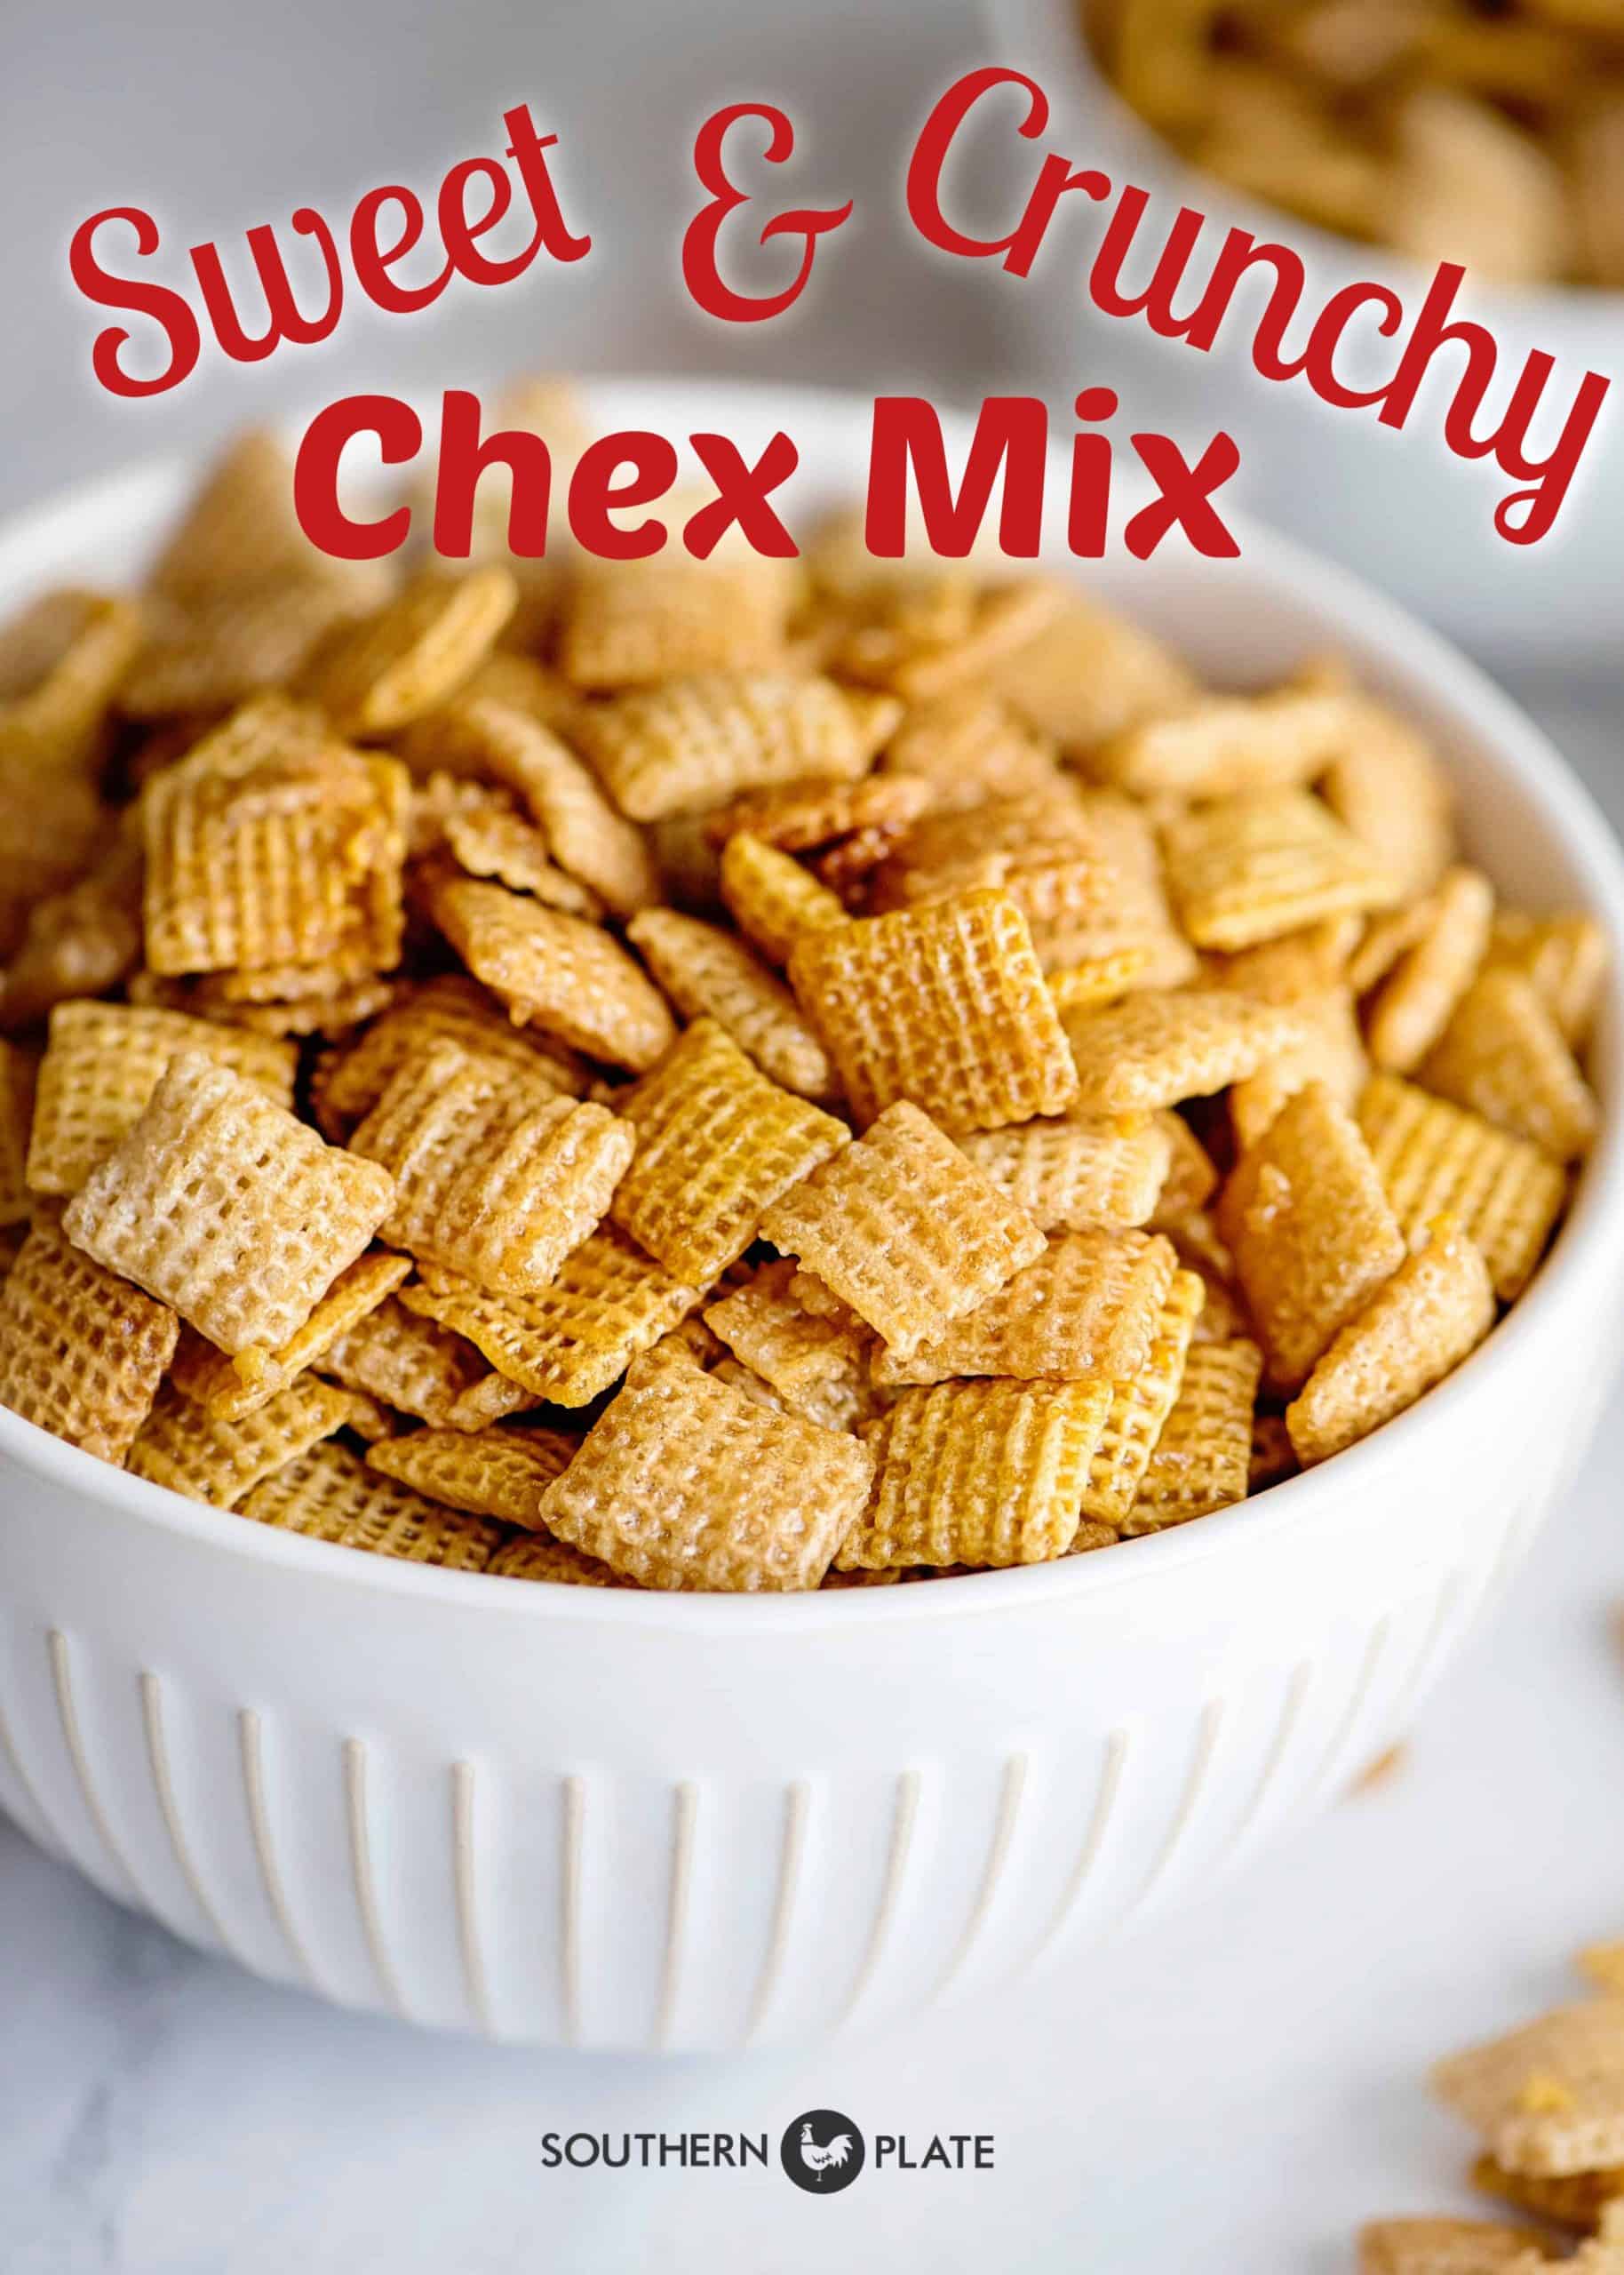 Sweet Chex Mix Recipe - Southern Plate